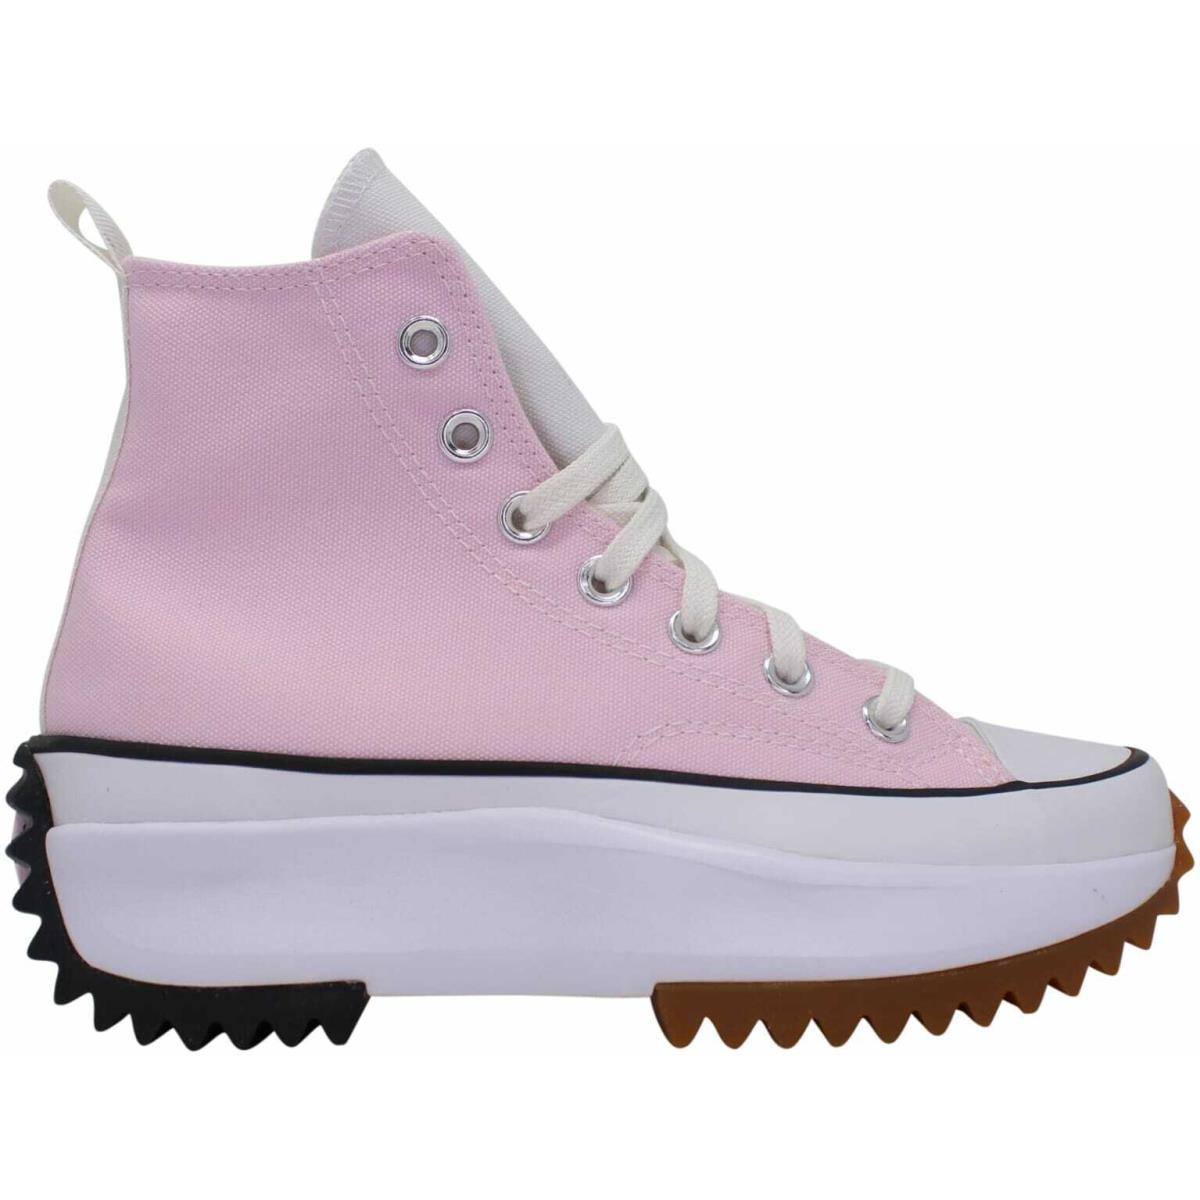 Converse Run Star Hike Hi 170968C Men`s Pink/white Athletic Sneakers Shoes HS597